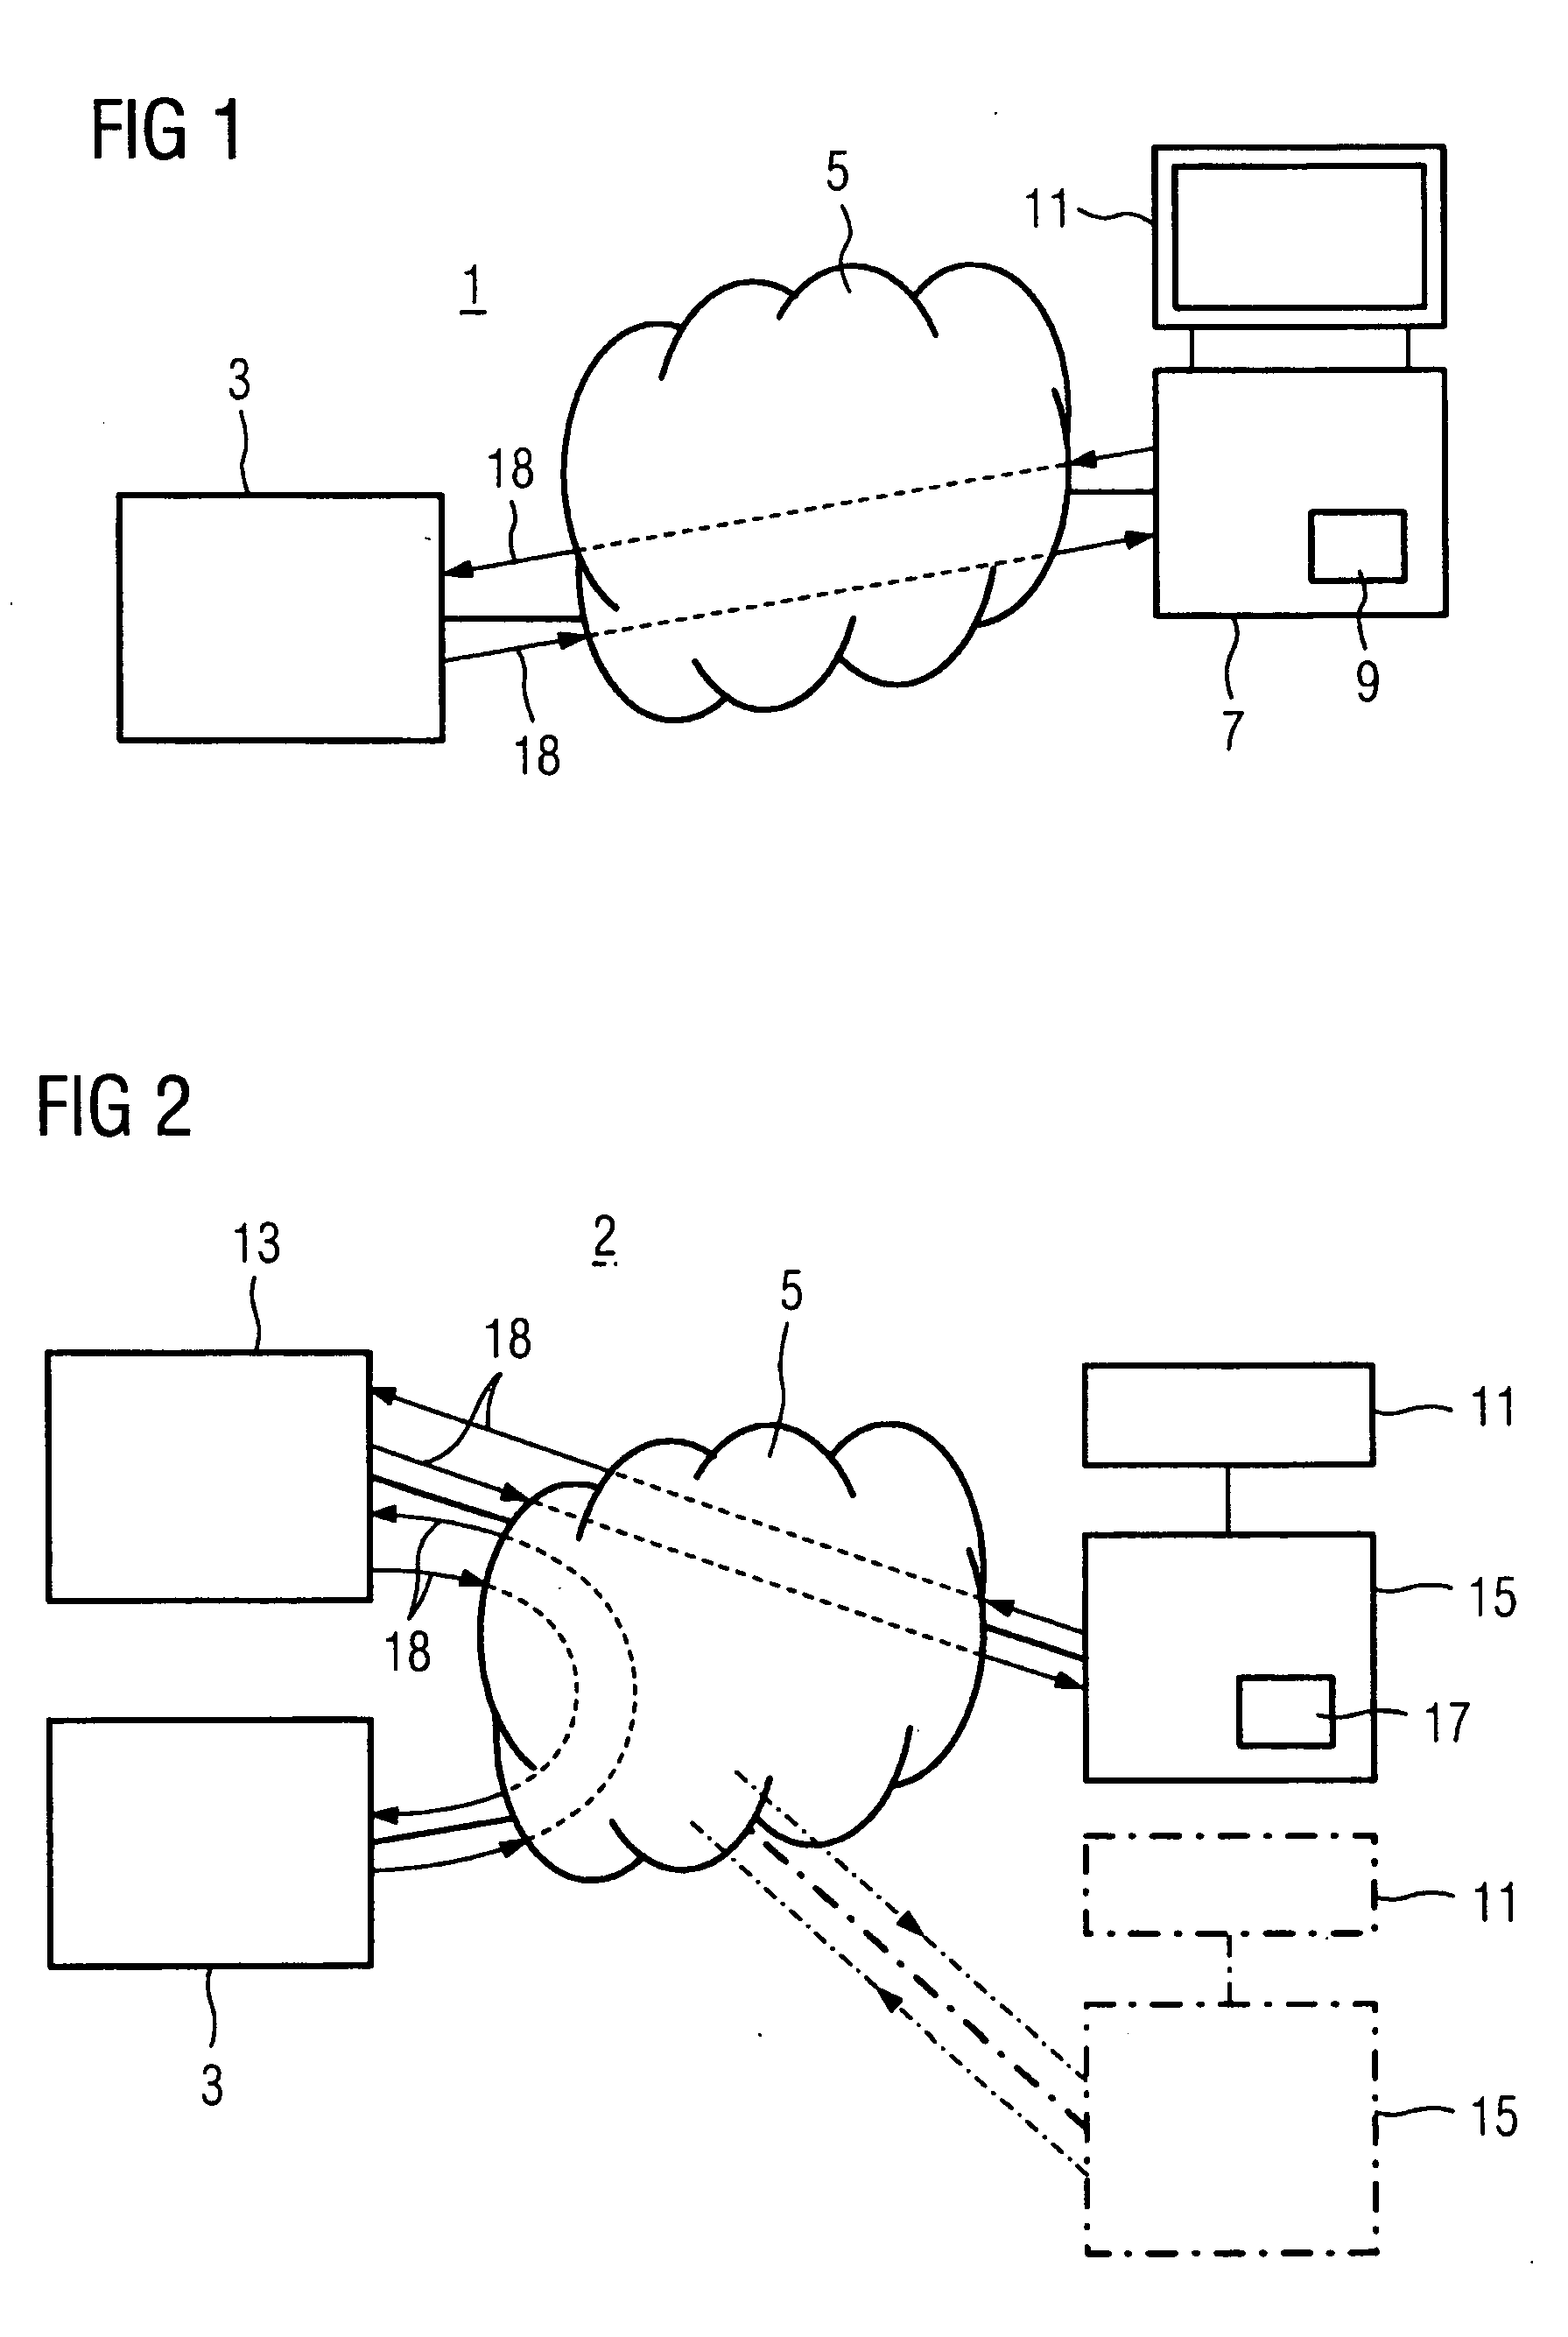 Method or System for Displaying an Internet Page on a Visualization Device of an Industrial Automation Device